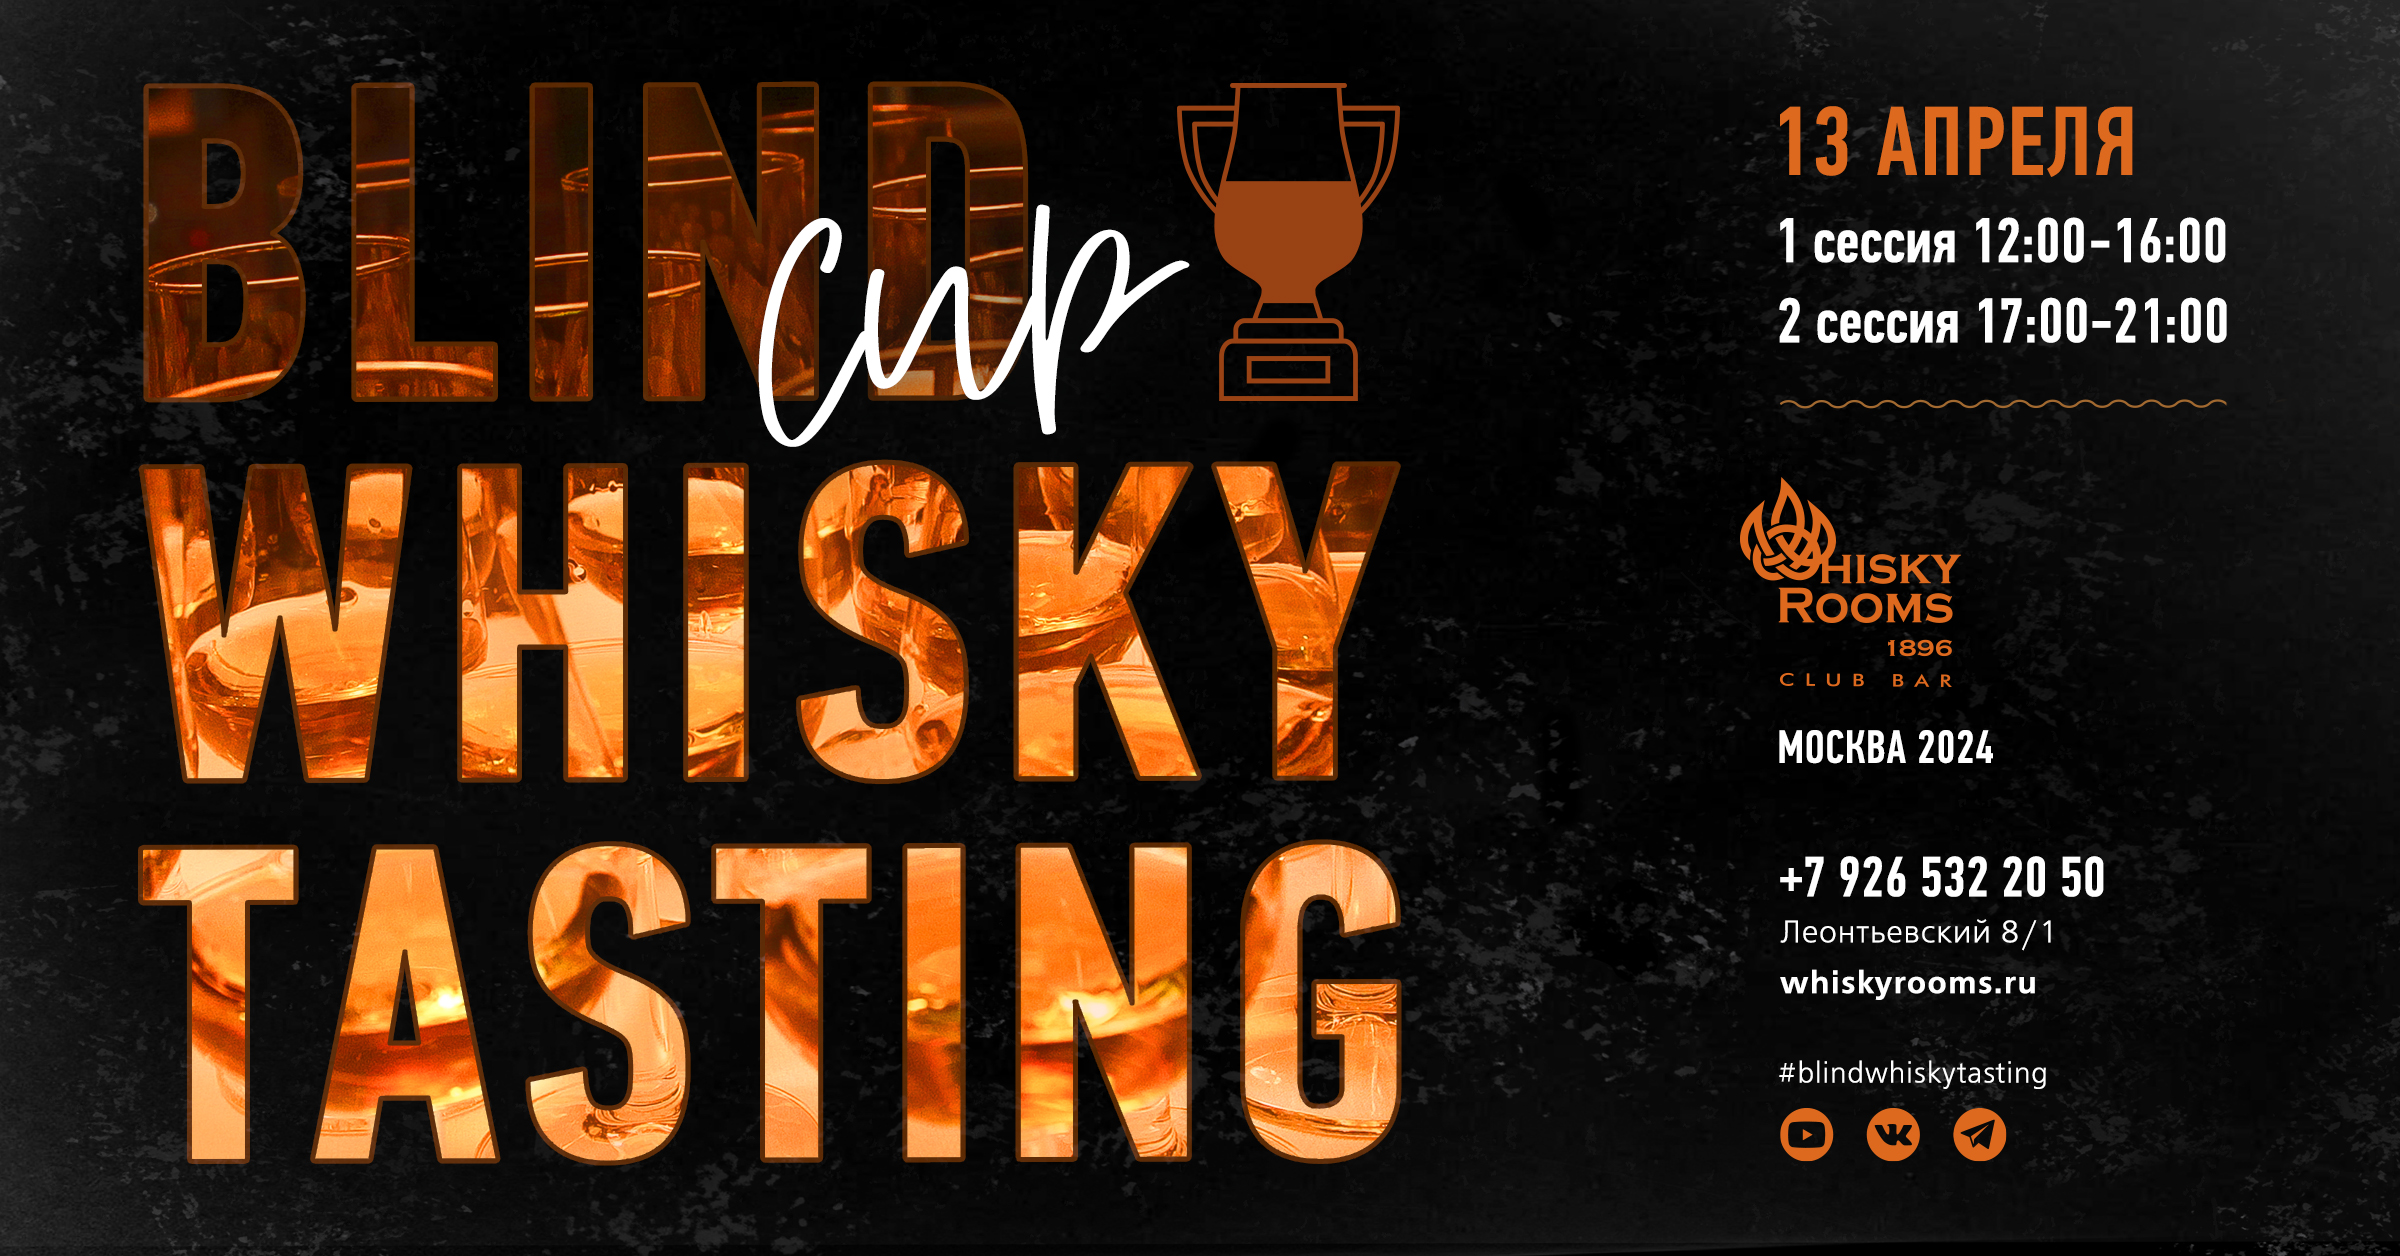 Афиша "BLIND WHISKY TASTING CUP 2024" ресторана "Whisky Rooms